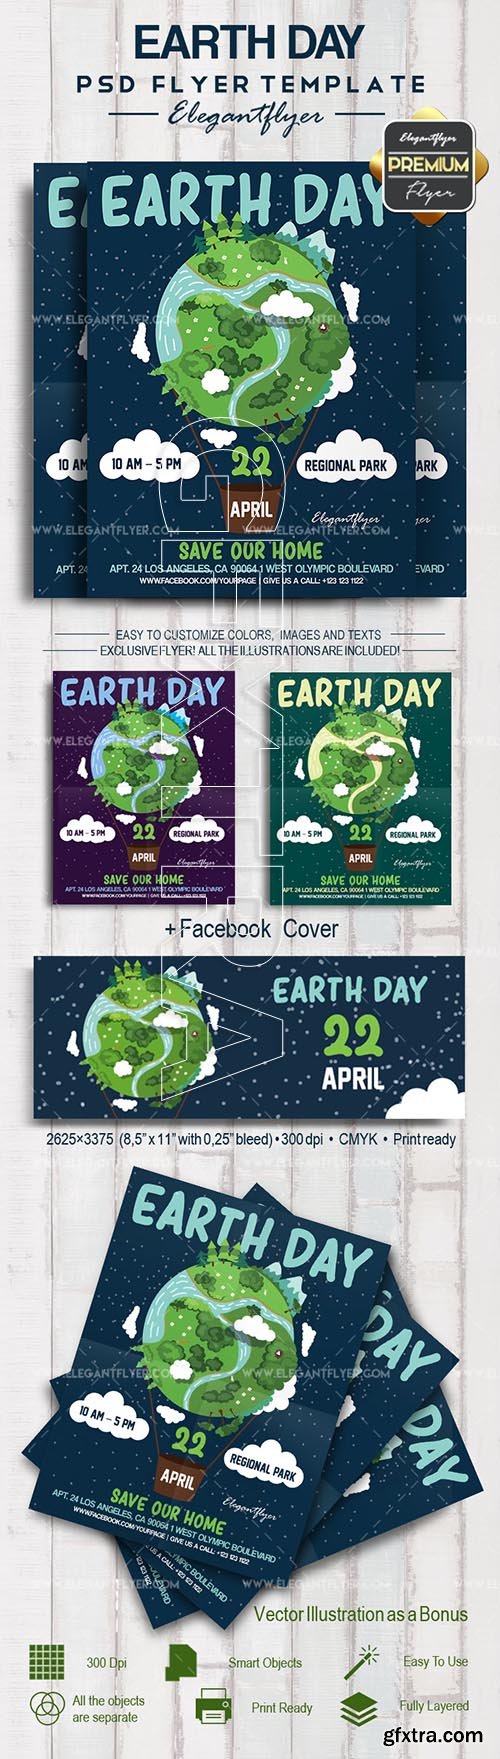 Earth Day – Flyer PSD Template + Facebook Cover